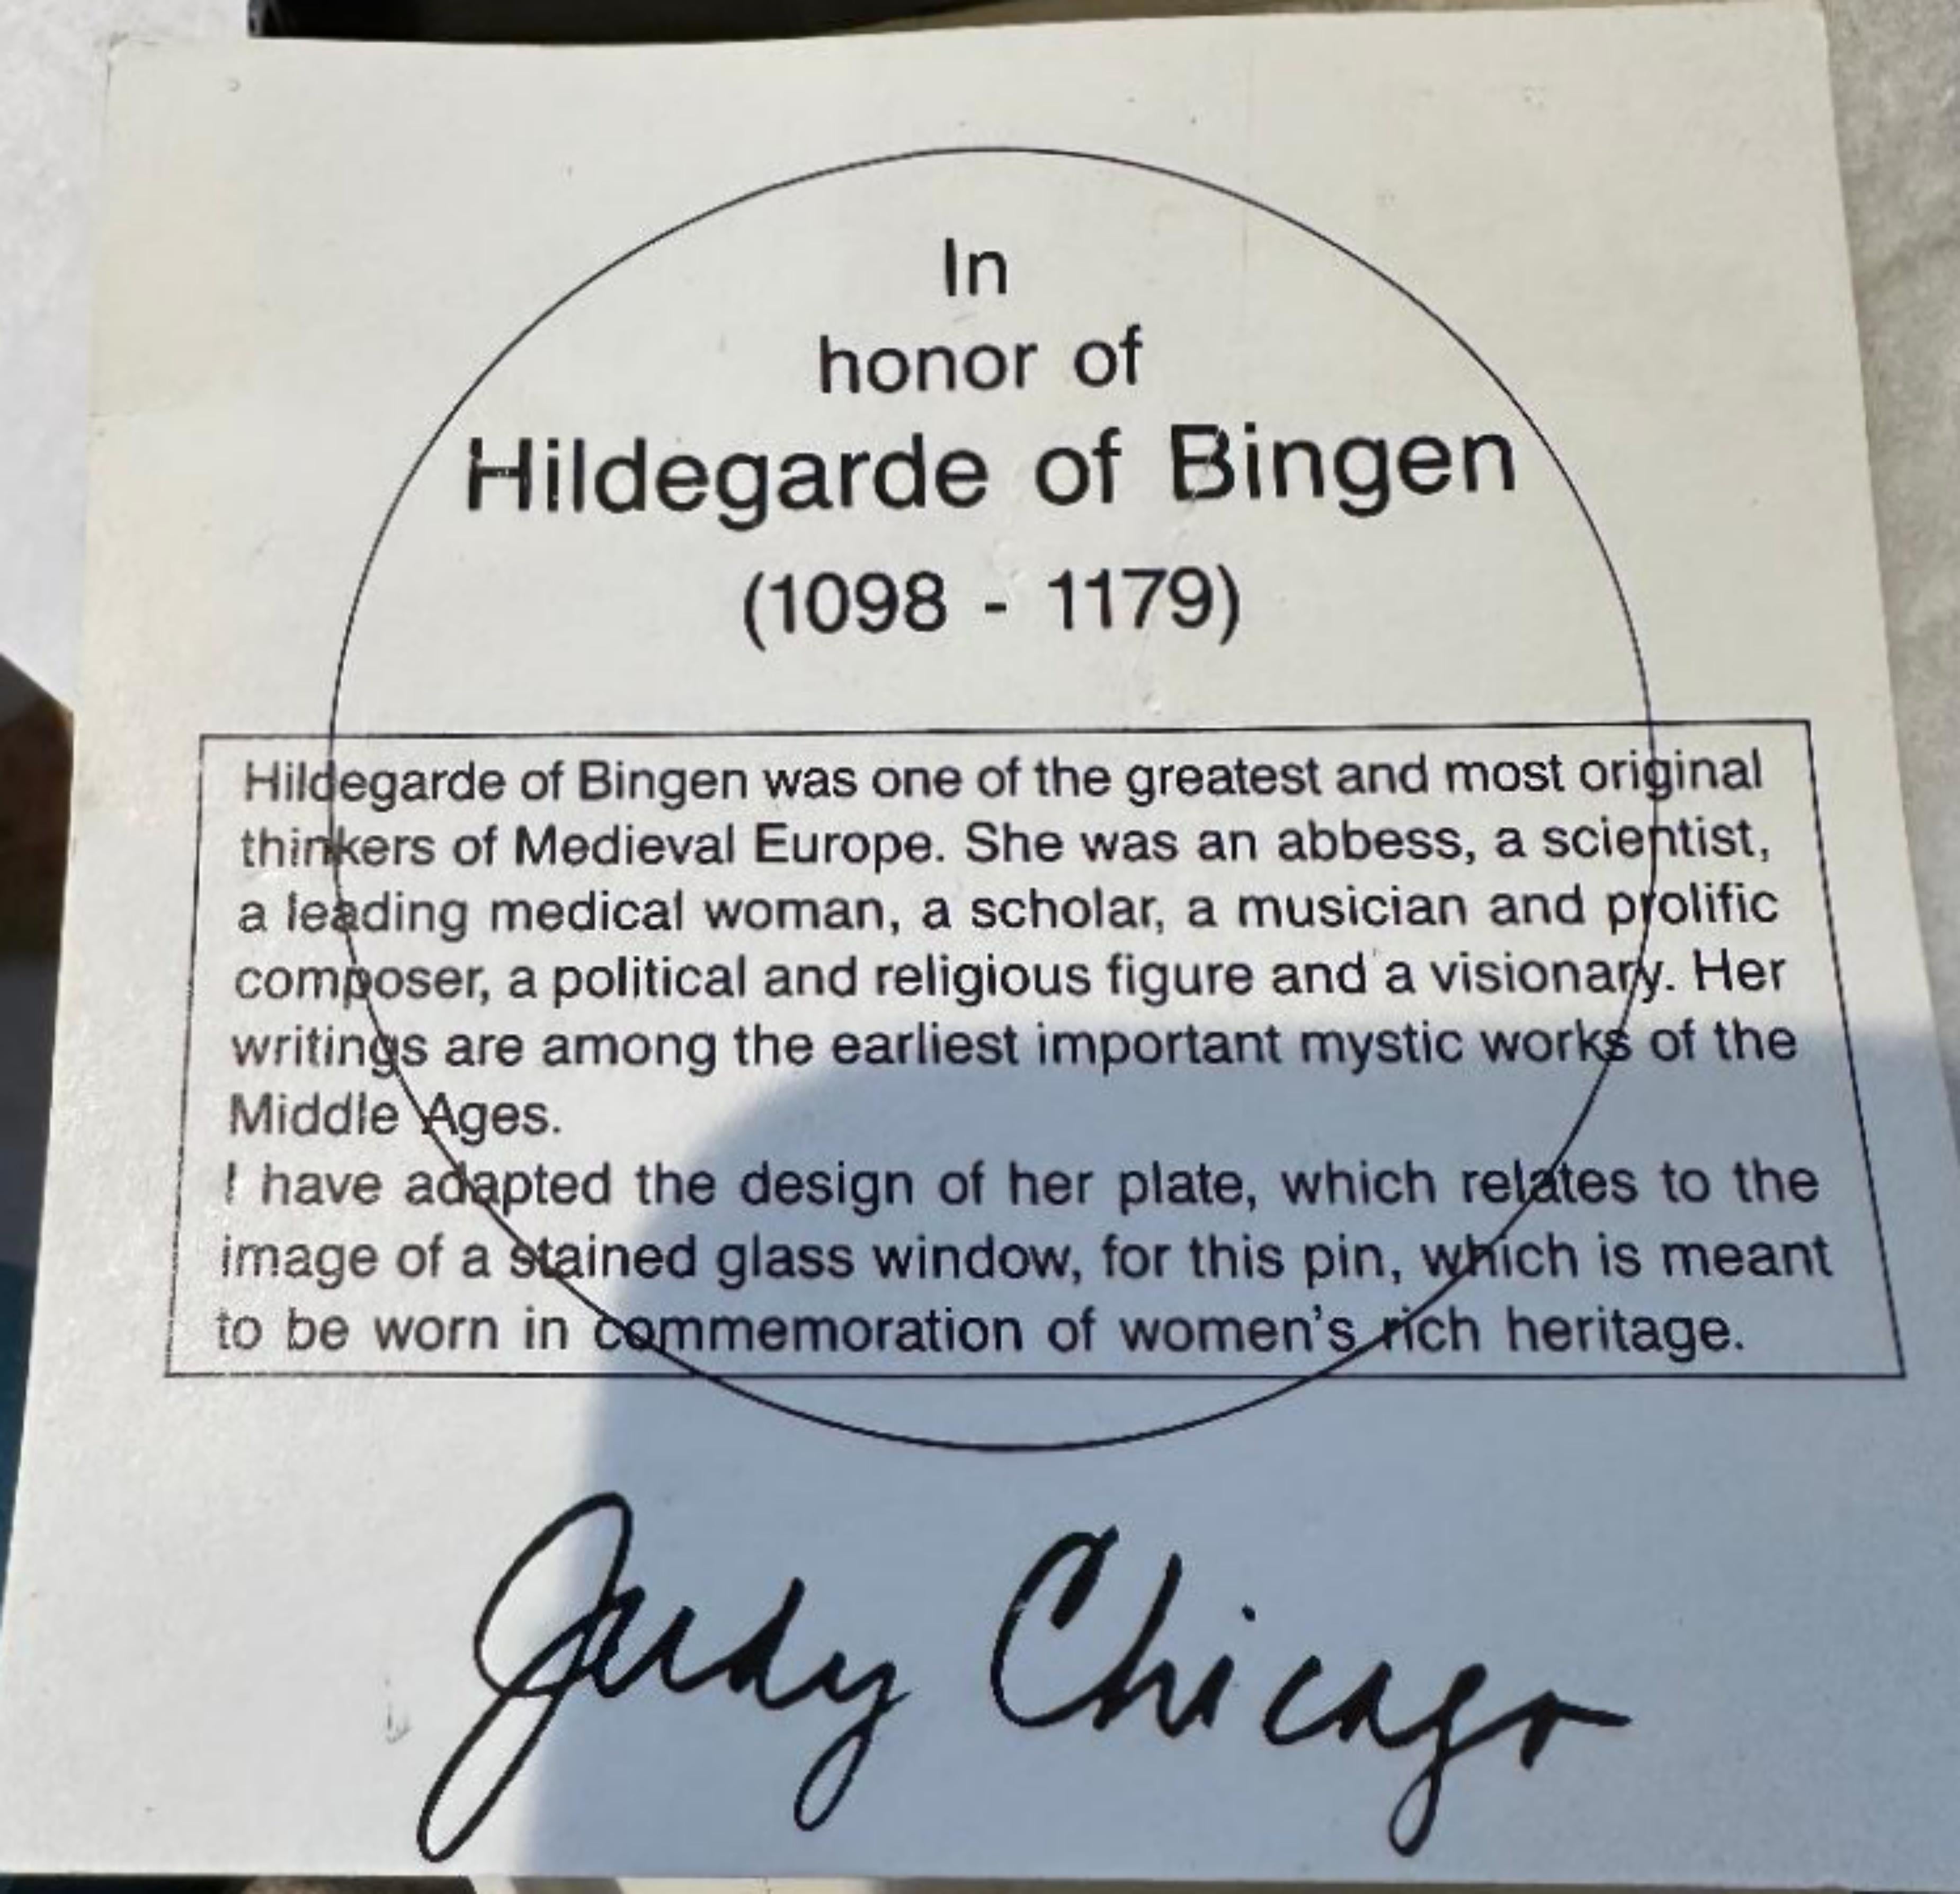 Judy Chicago
Cloisonne Brooch of Hildegard of Bingen from The Dinner Party, 1987
Cloisonne brooch/pin with clasp on the back and Judy Chicago's incised signature and copyright
2 in diameter
Artist's incised signature, date and copyright incised on